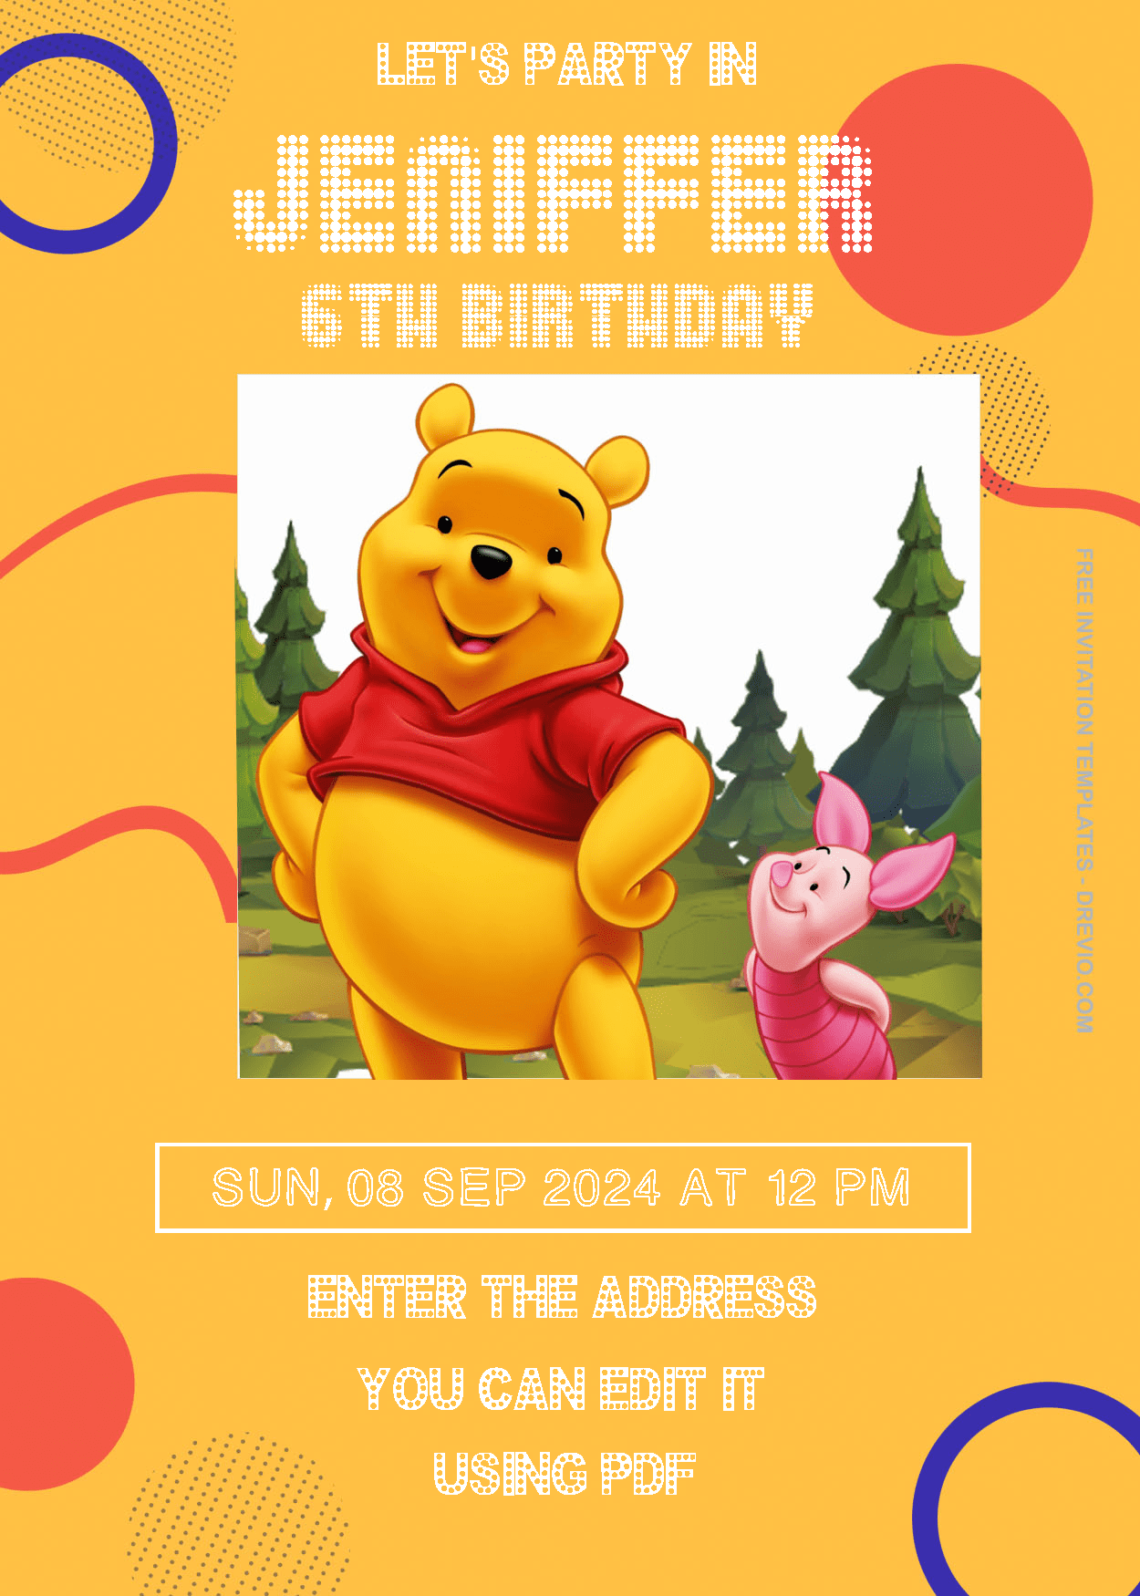 ( Free Editable PDF ) Winnie The Pooh In The House Birthday Invitation Templates One